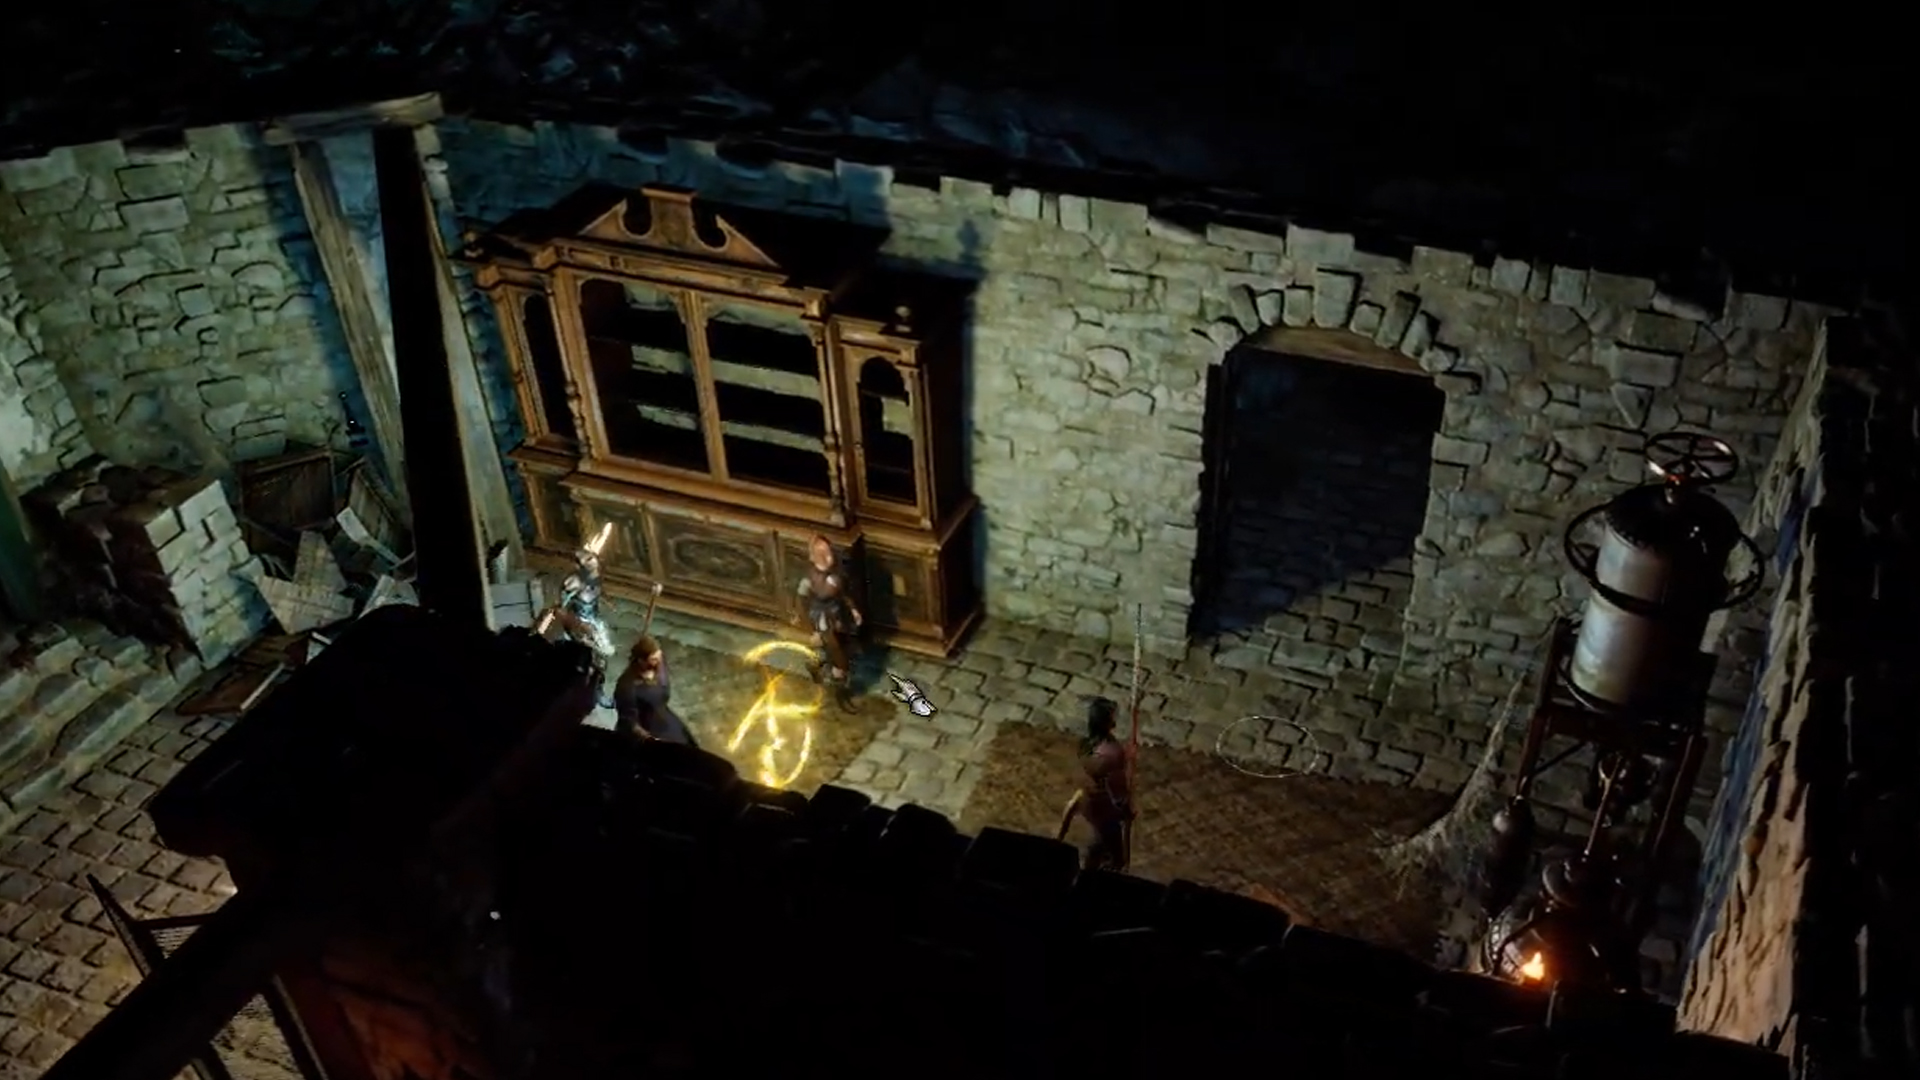 Baldur's Gate 3: How To Complete The 'Search The Cellar' Quest